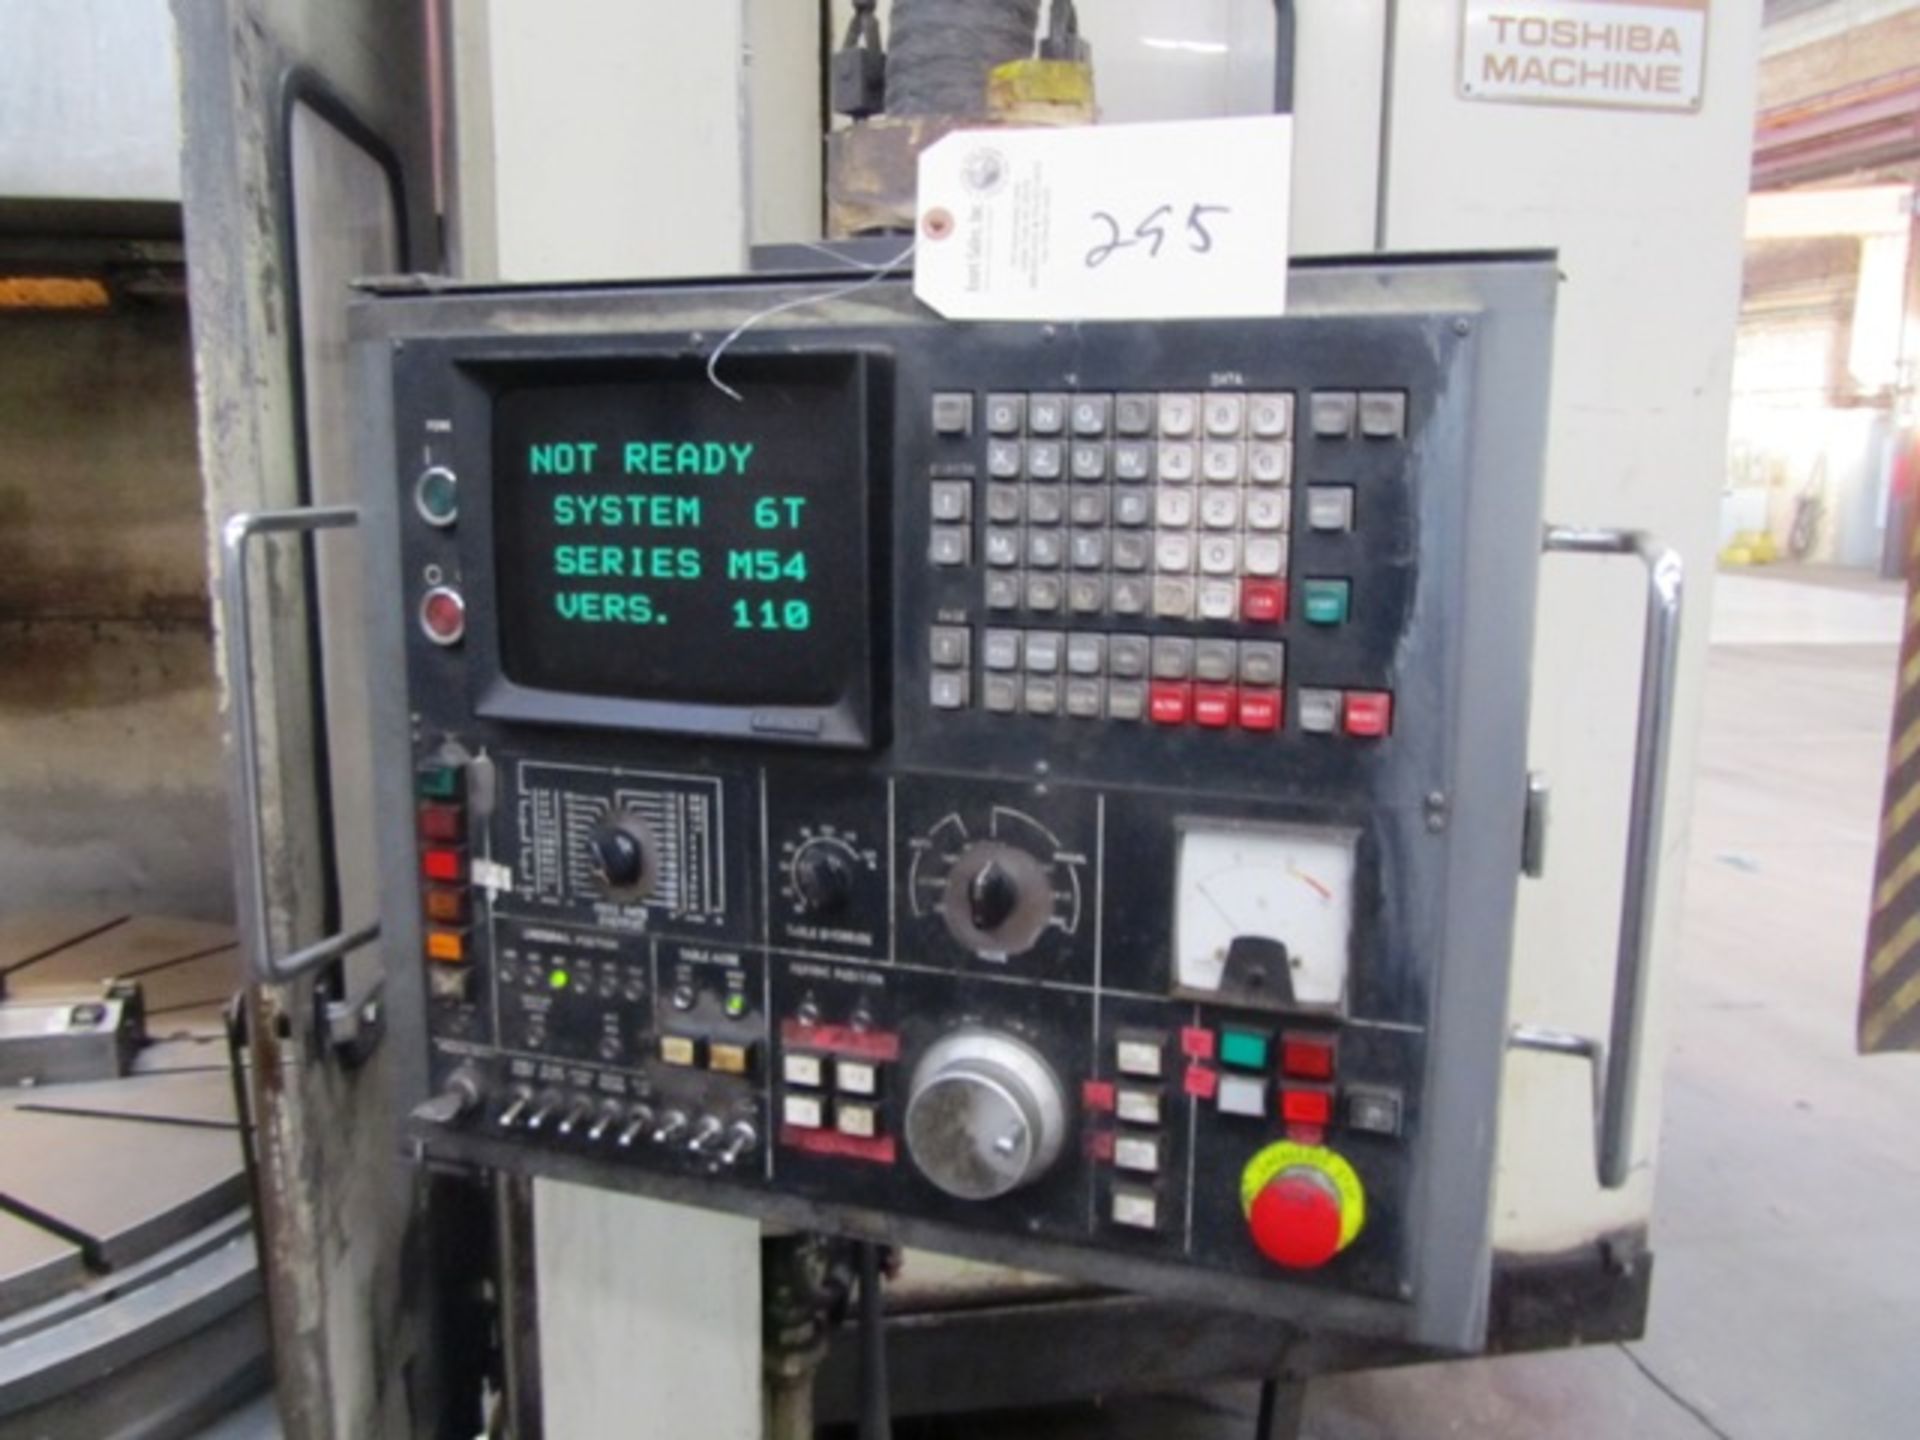 Toshiba TXN-16 CNC Vertical Boring Mill with 12-ATC, 62.99'' Table, 4-Jaw Chuck, 78.74'' Turning - Image 2 of 6